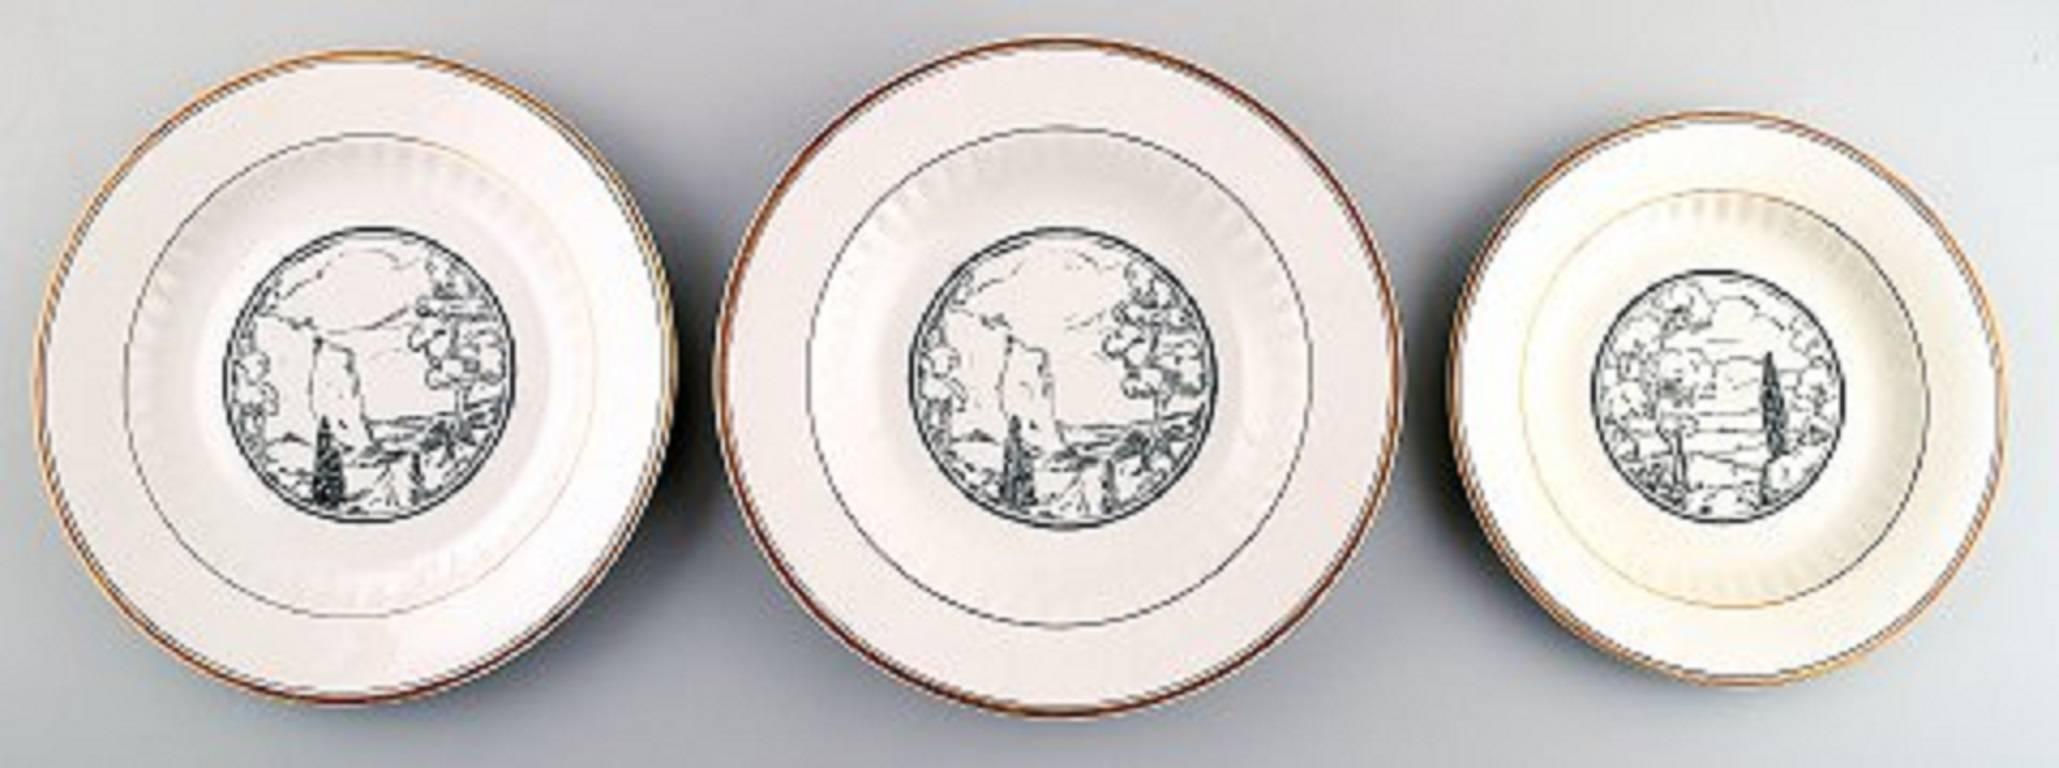 Wilhelm Kåge, Gustavsberg. Dinner service 'Landscape' in earthenware.

Consisting of: Tureen with lid, sauceboat, eight dinner plates (25 cm.), eight soup plates (25 cm.) and eight lunch plates (21.5 cm.),

Sweden, 1930s.

In good condition.